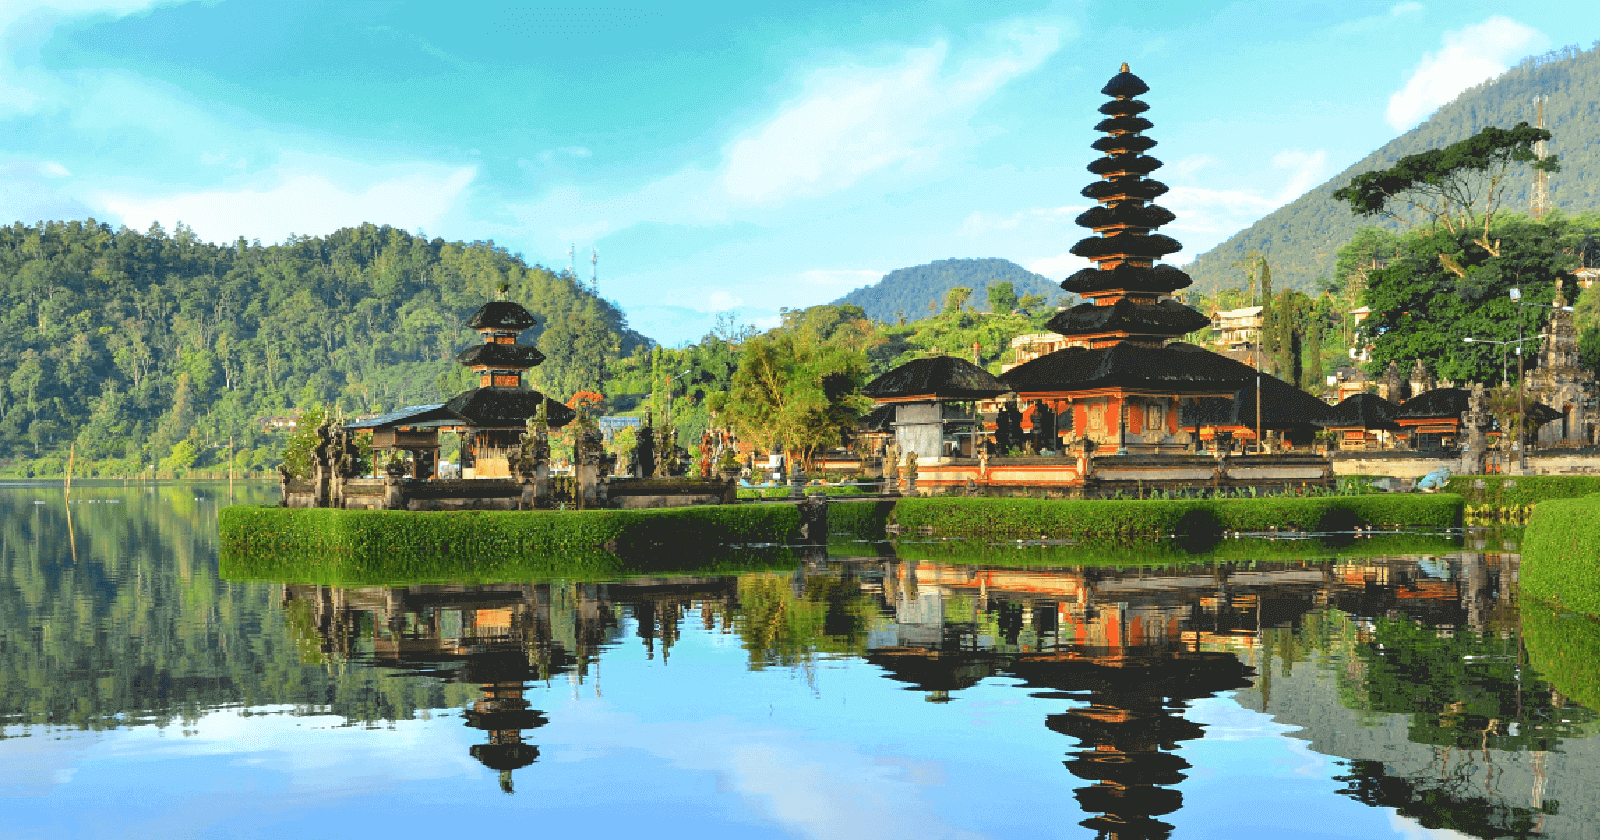 Best Time and Season to Visit Bali Complete Guide